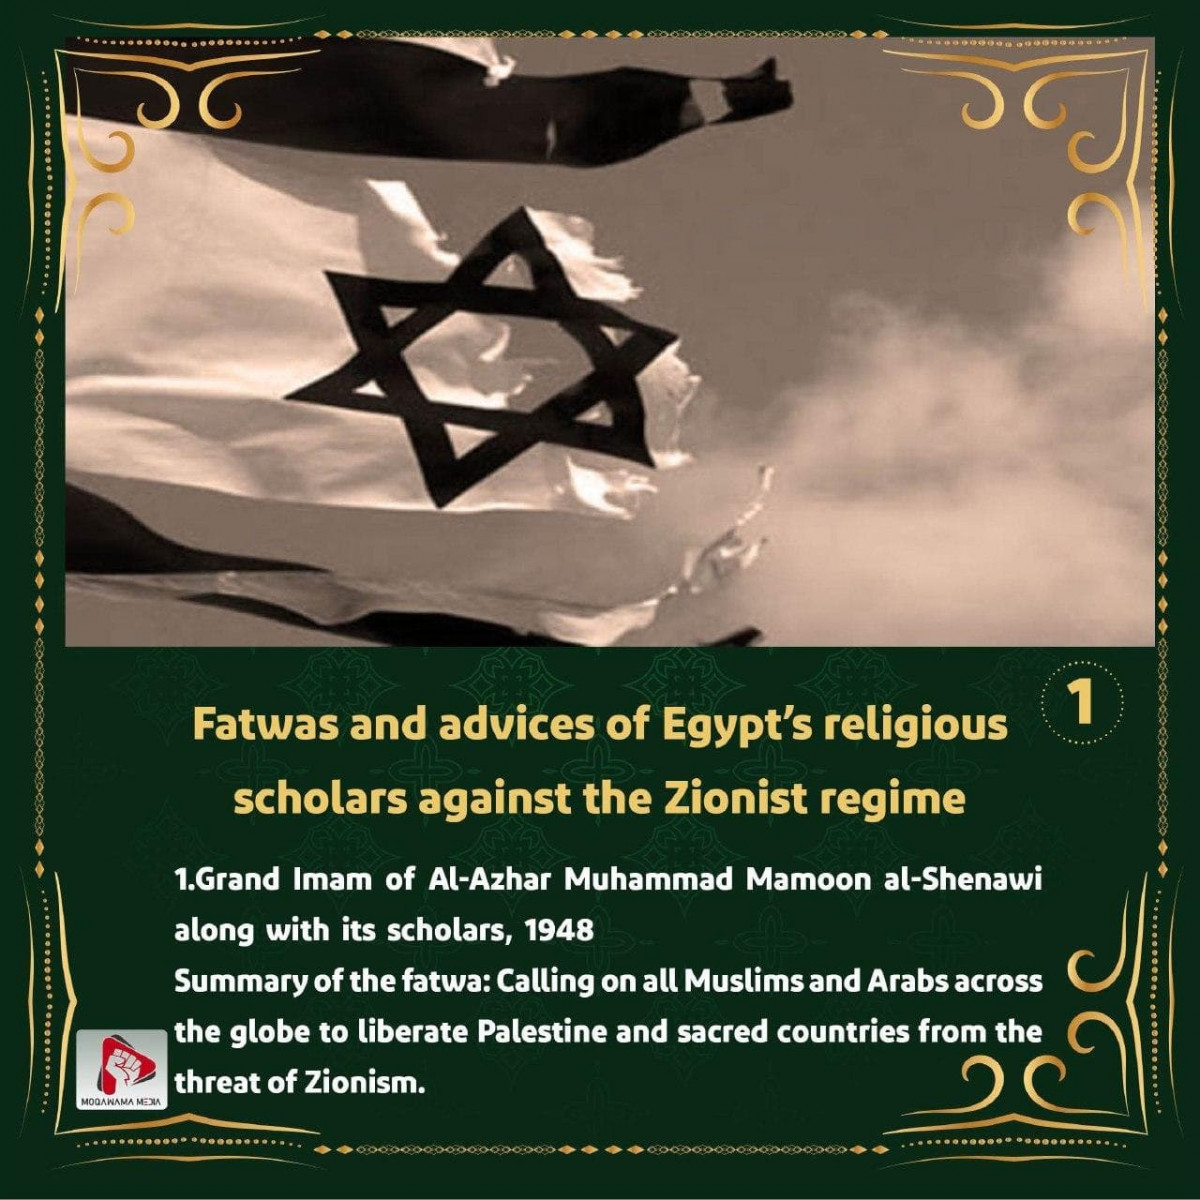 Fatwas and advices of Egypt's religious scholars against the Zionist regime 1